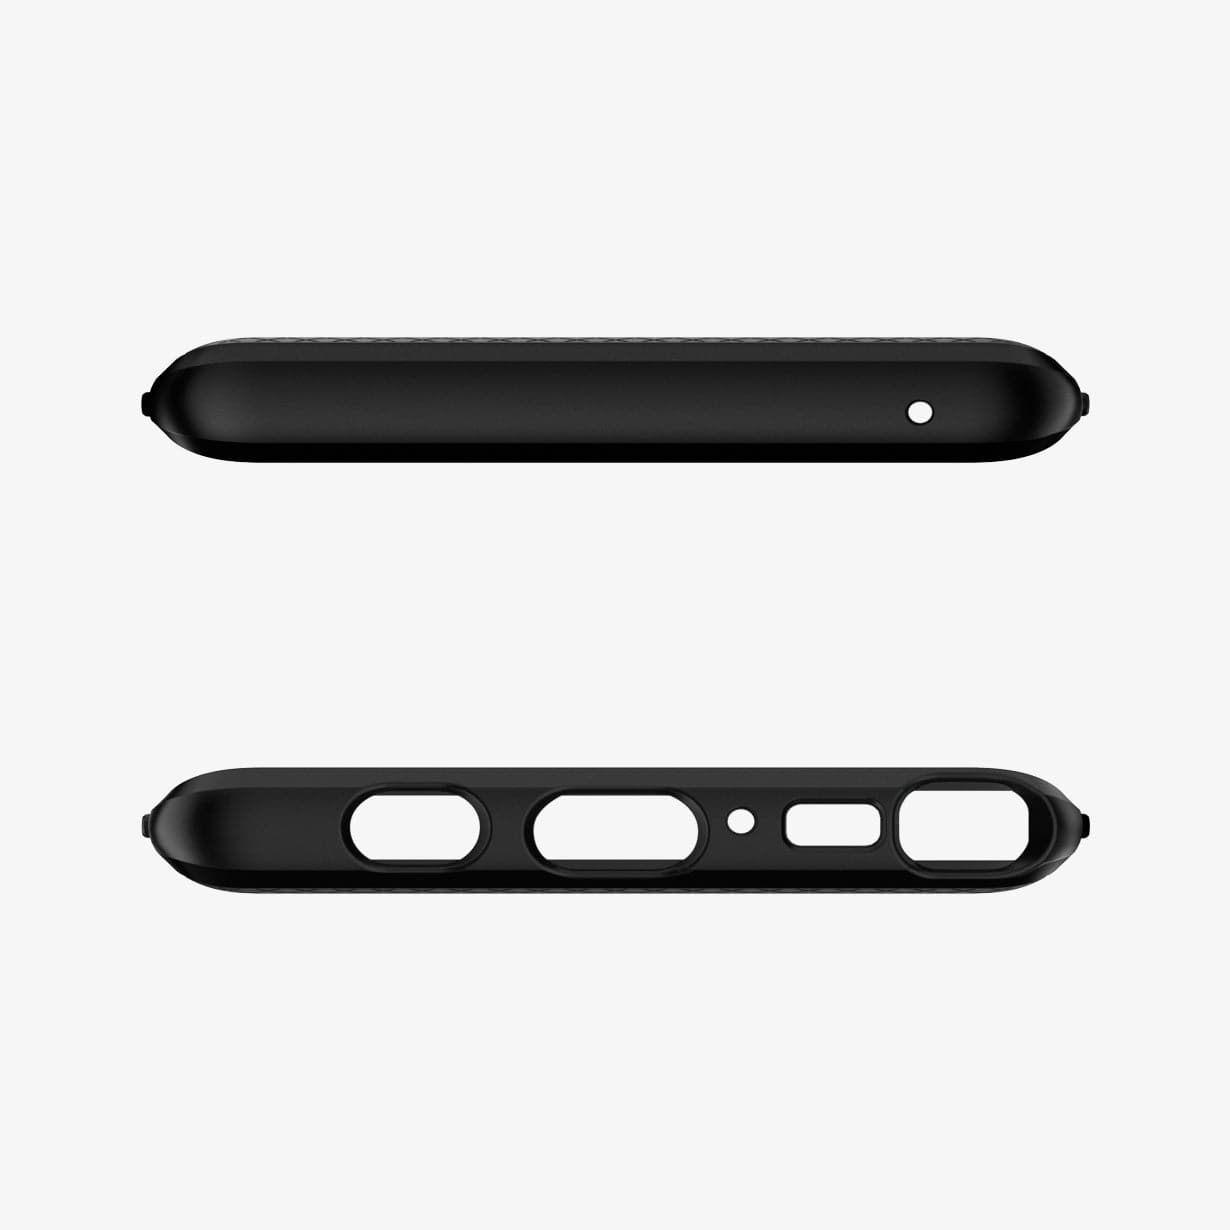 599CS24580 - Galaxy Note 9 Liquid Air Case in black showing the top and bottom